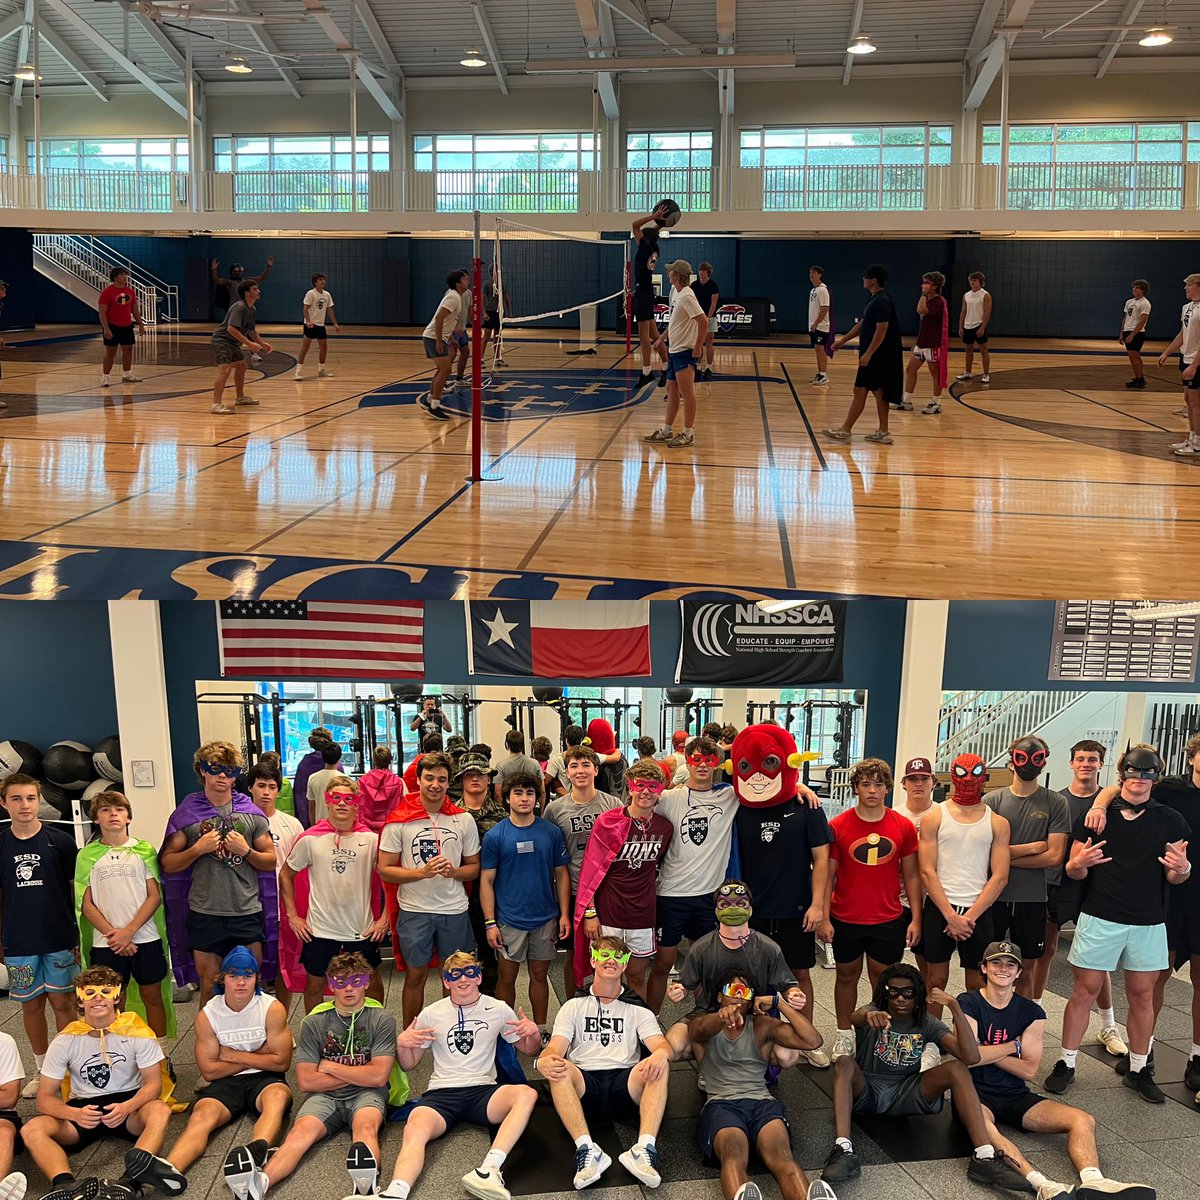 MB Volleyball and Superhero Thursday to finish off Week 6! Standings going into final full week: 1. Desperados 183 2. Mean Machine 170 3. Decepticons 137 4. Nicholson 115 5. Neuhoff 111 6. Doninators 102 7. Swolverines 96 8. Stibbens 90